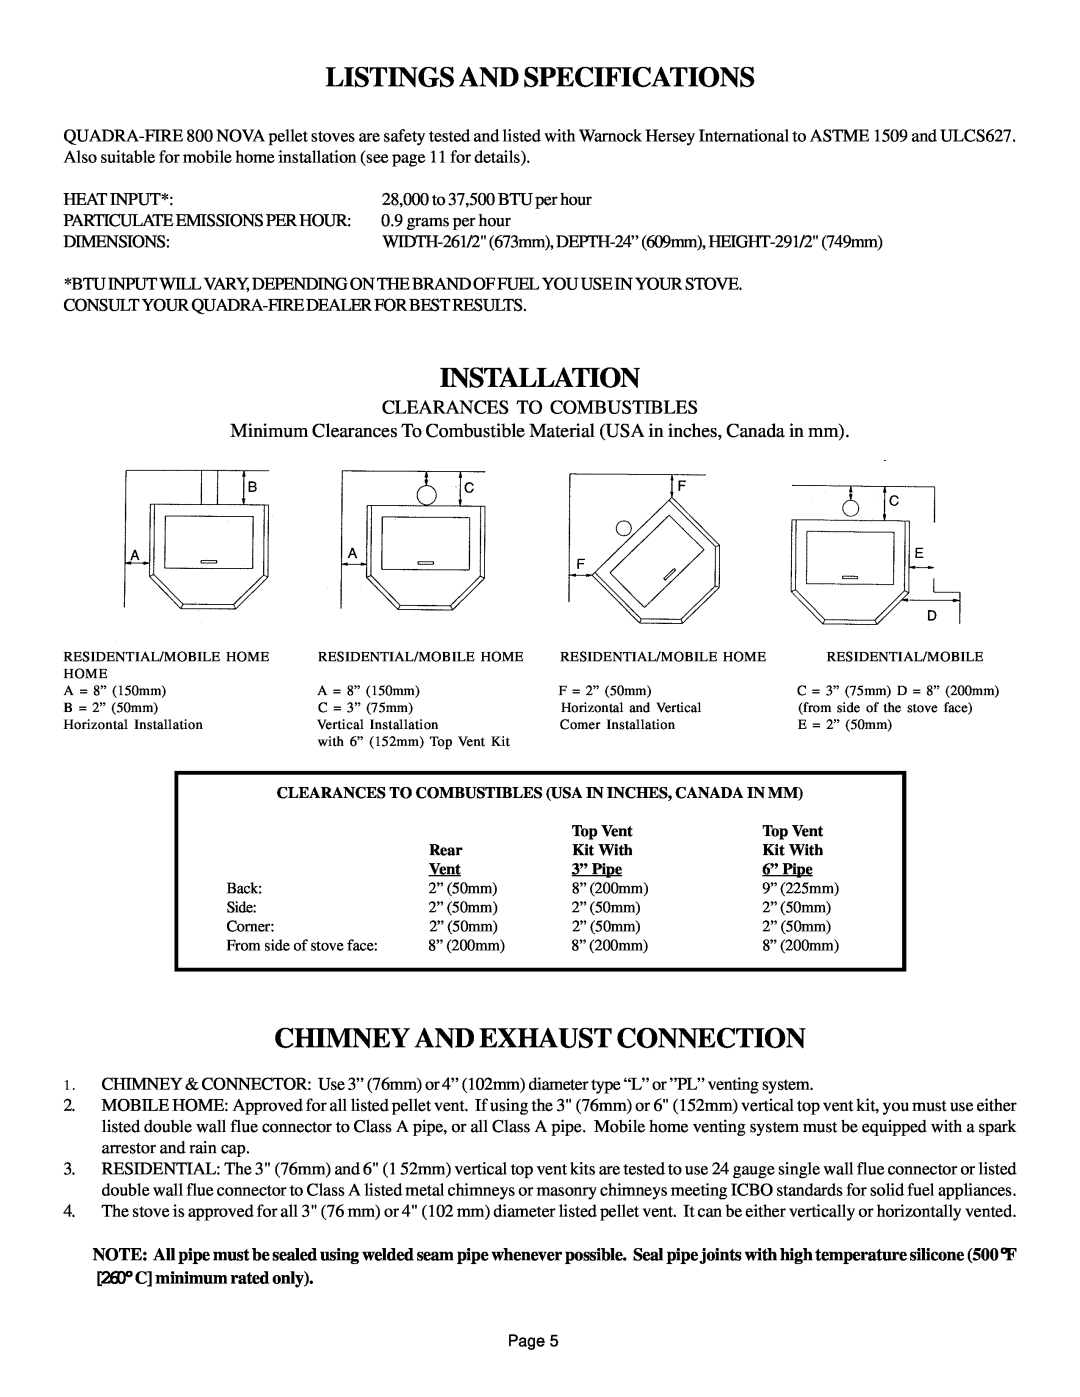 Hearth and Home Technologies 800 owner manual Listings And Specifications, Installation, Chimney And Exhaust Connection 